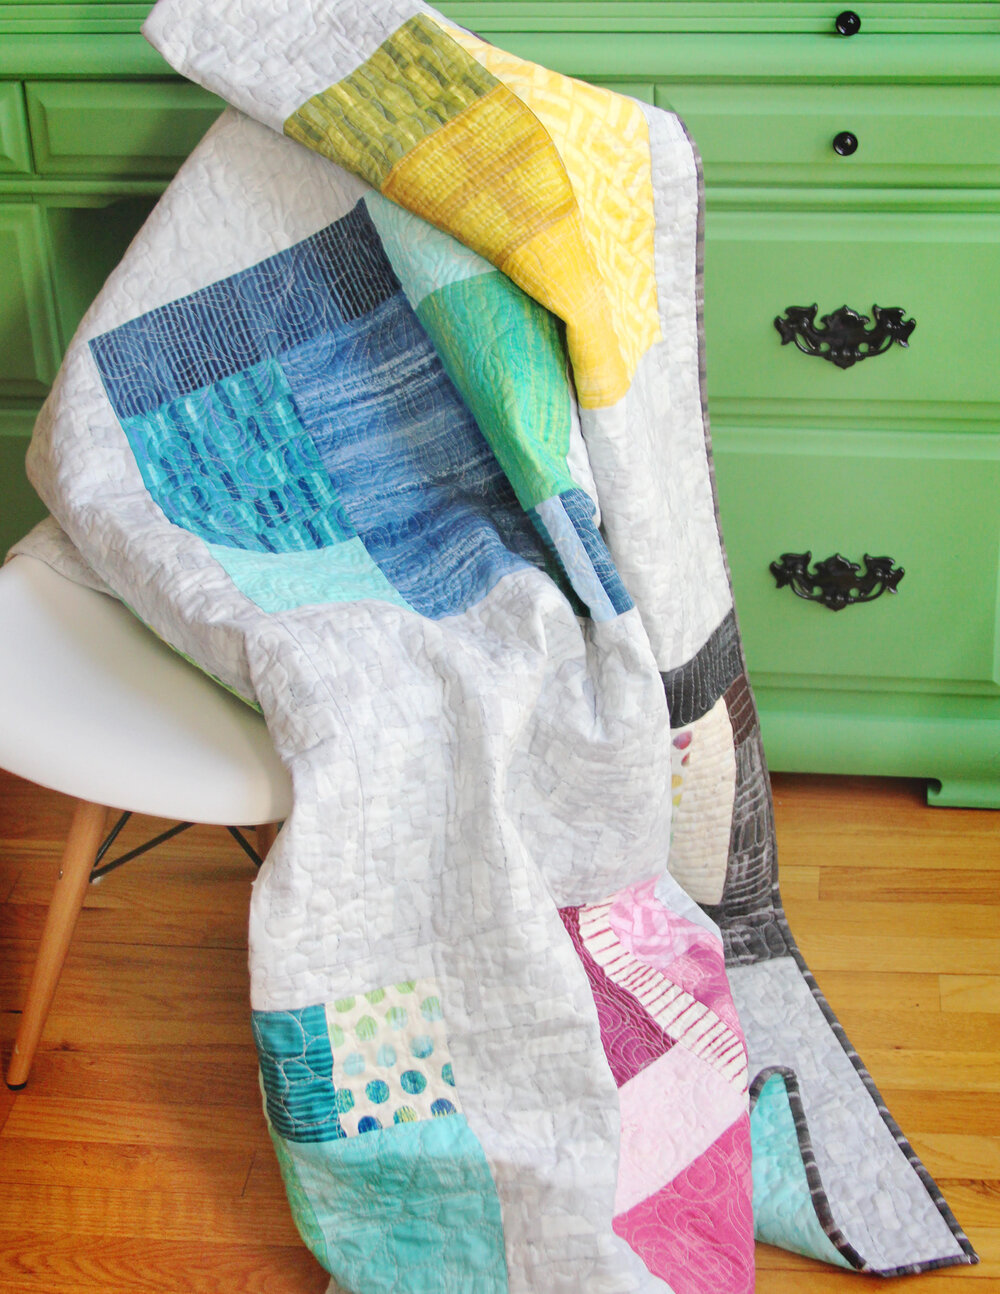 DIY Quilt Design Wall // Try it Tuesday — Swim Bike Quilt